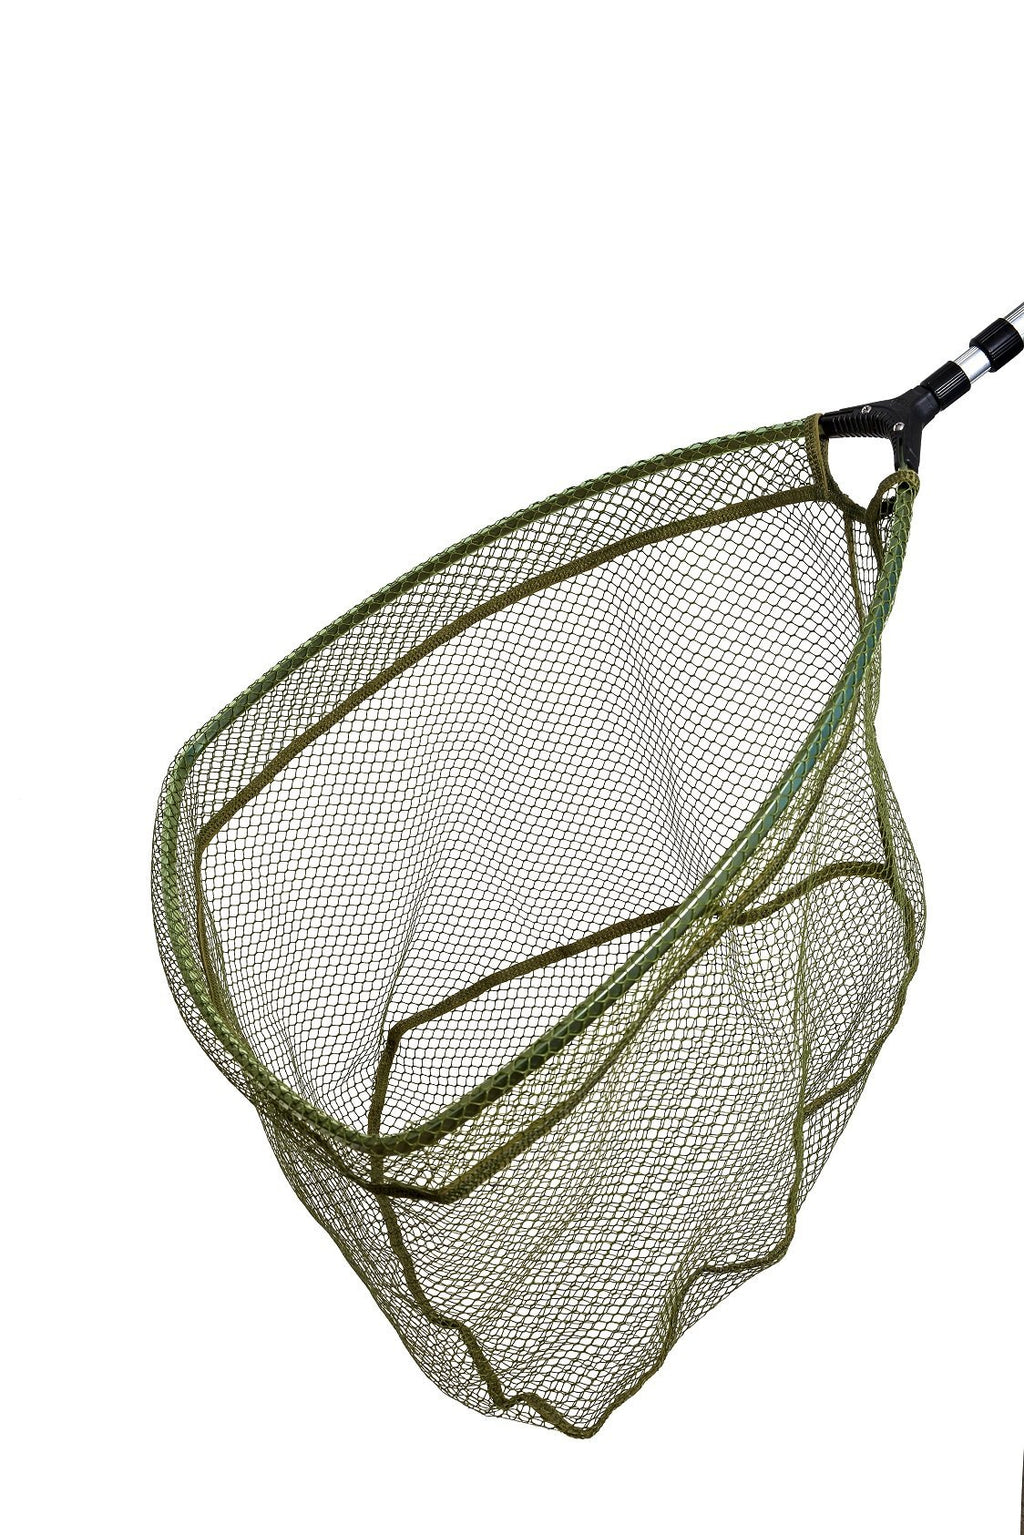 Supply 150 cm dragonfly net insect capture net fishing net for